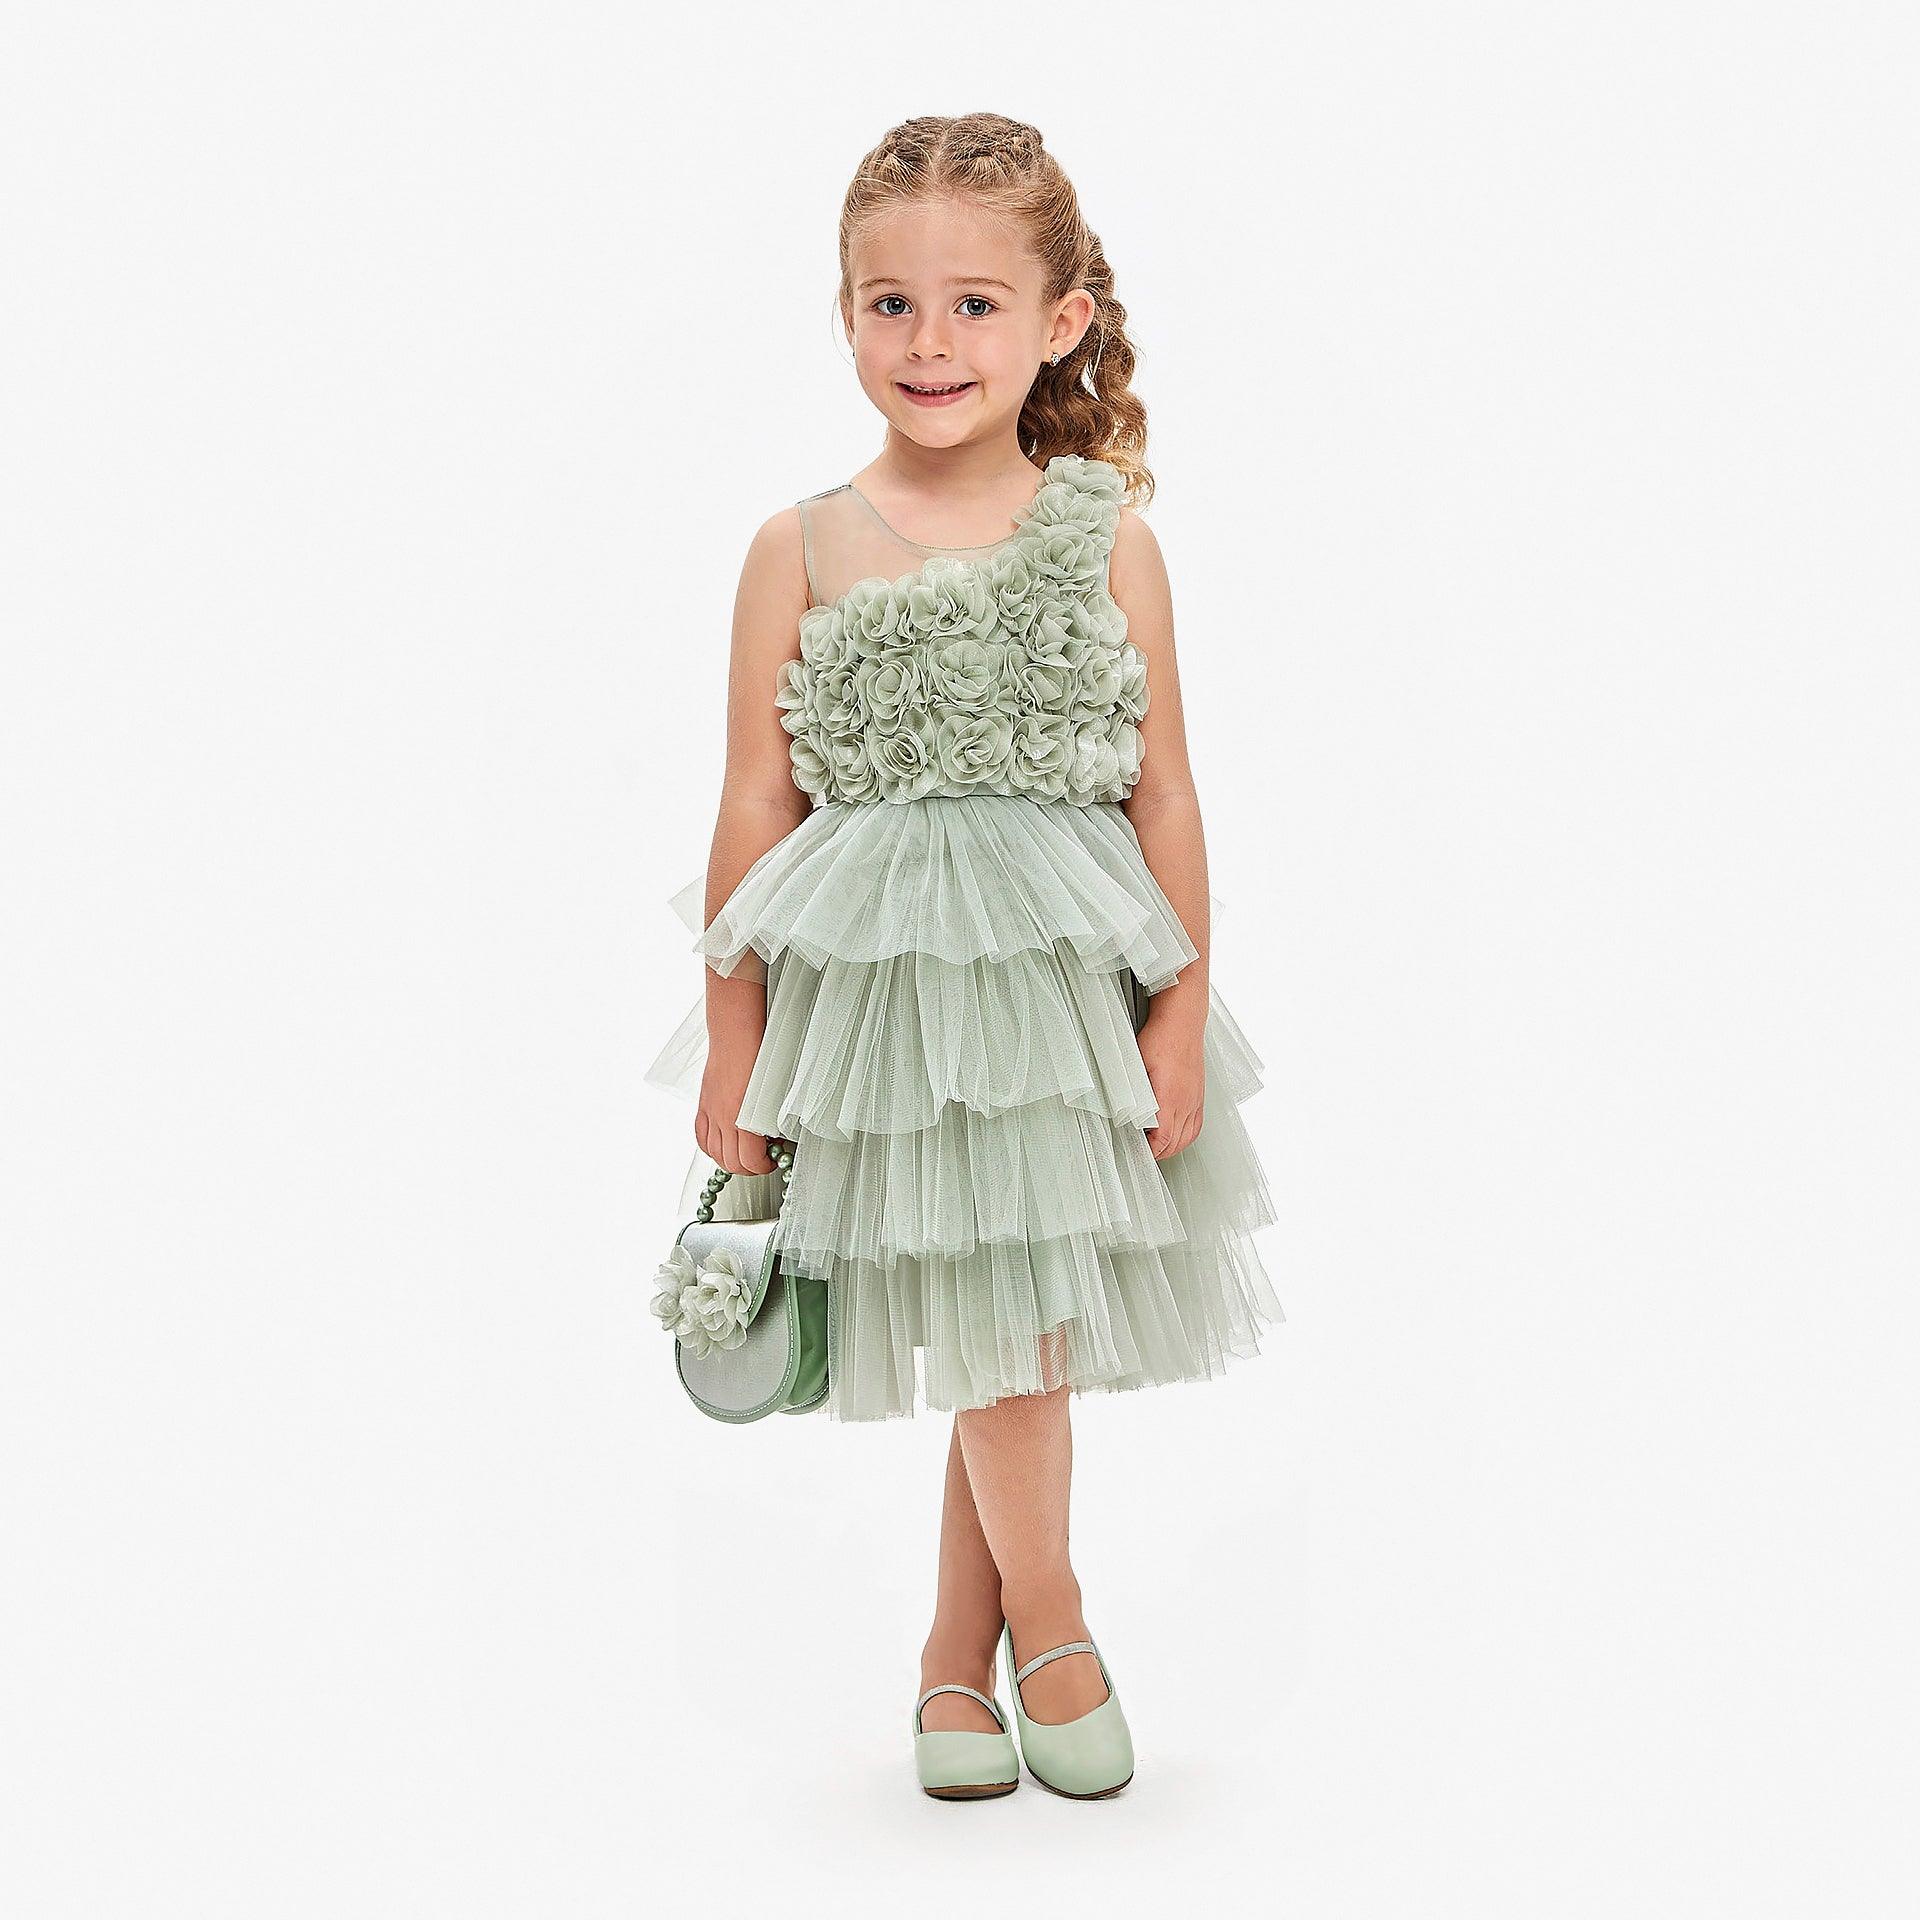 Light Green Roses Kids Dress By Wecre8 - WECRE8